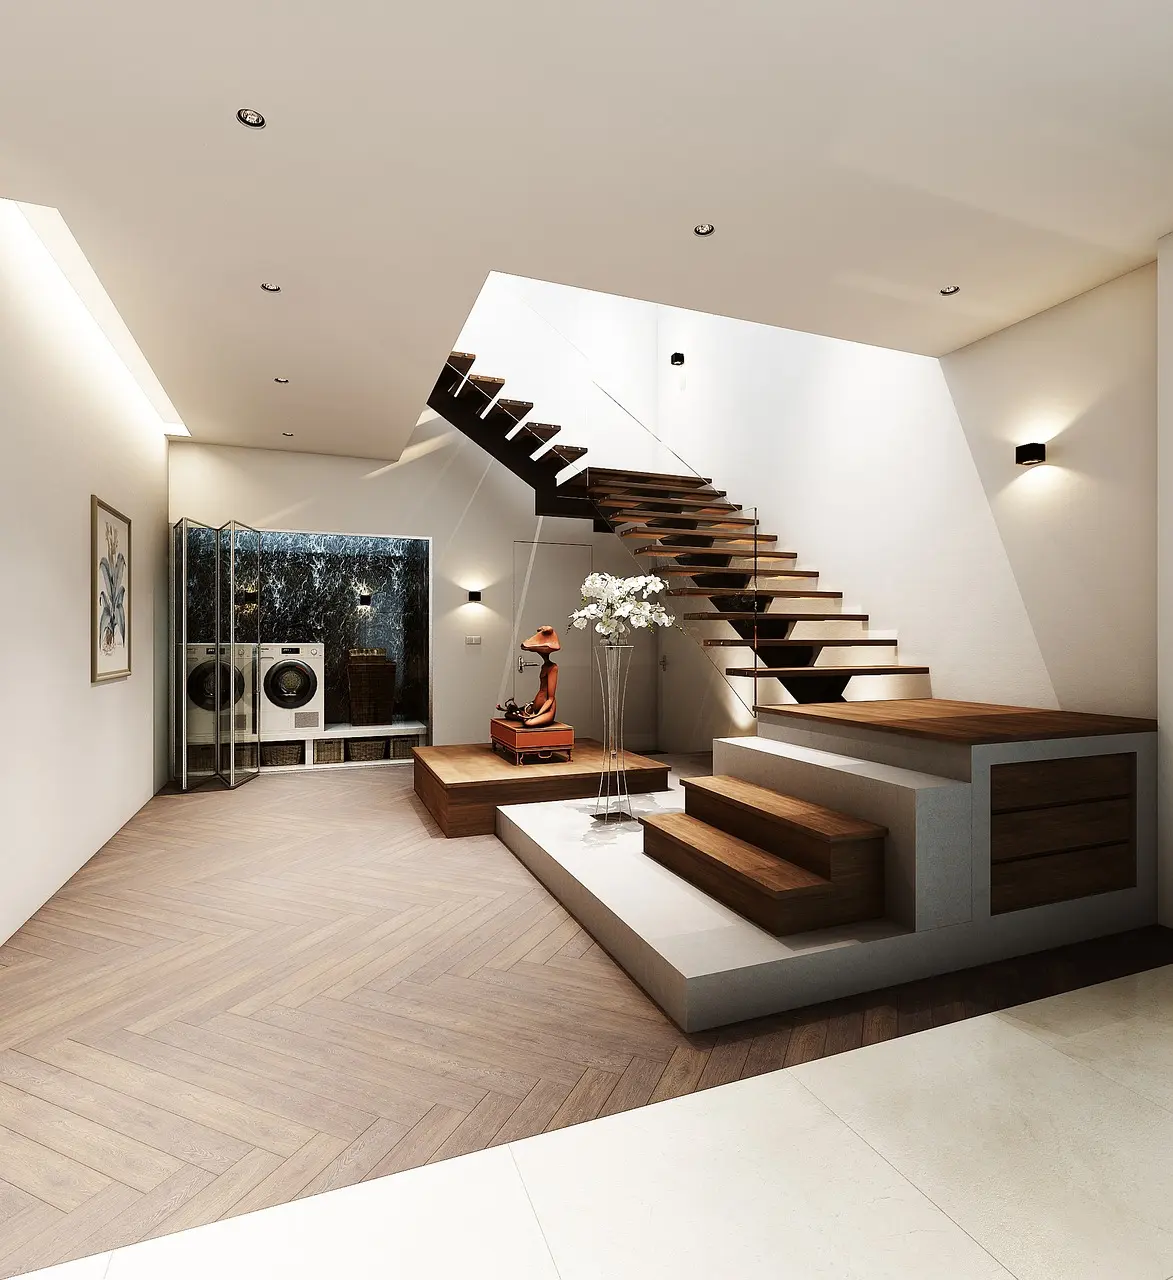 Modular wooden stairway for home